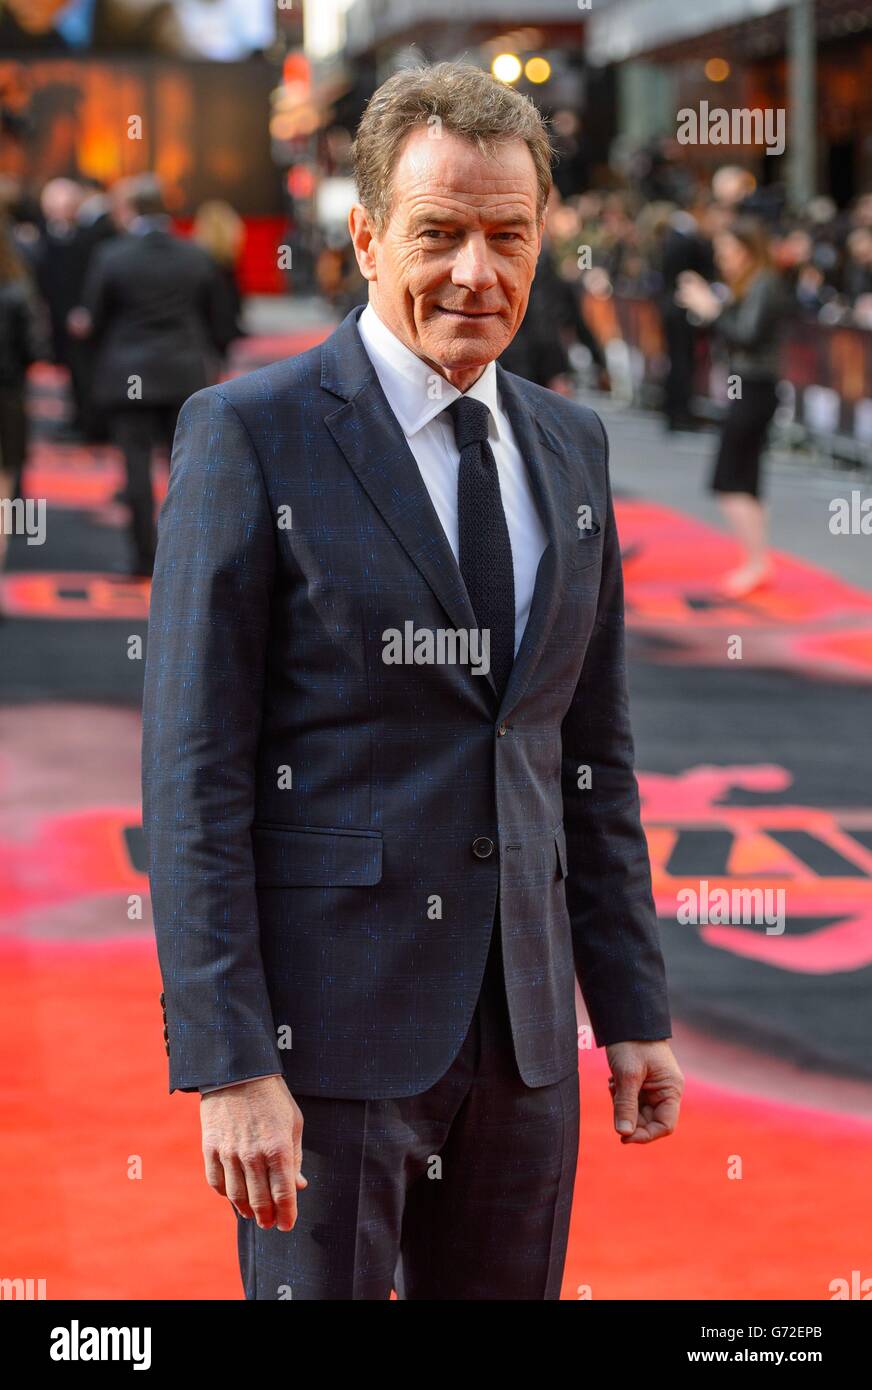 Bryan Cranston arriving at the European premiere of Godzilla, at the Odeon Leicester Square, central London. Stock Photo